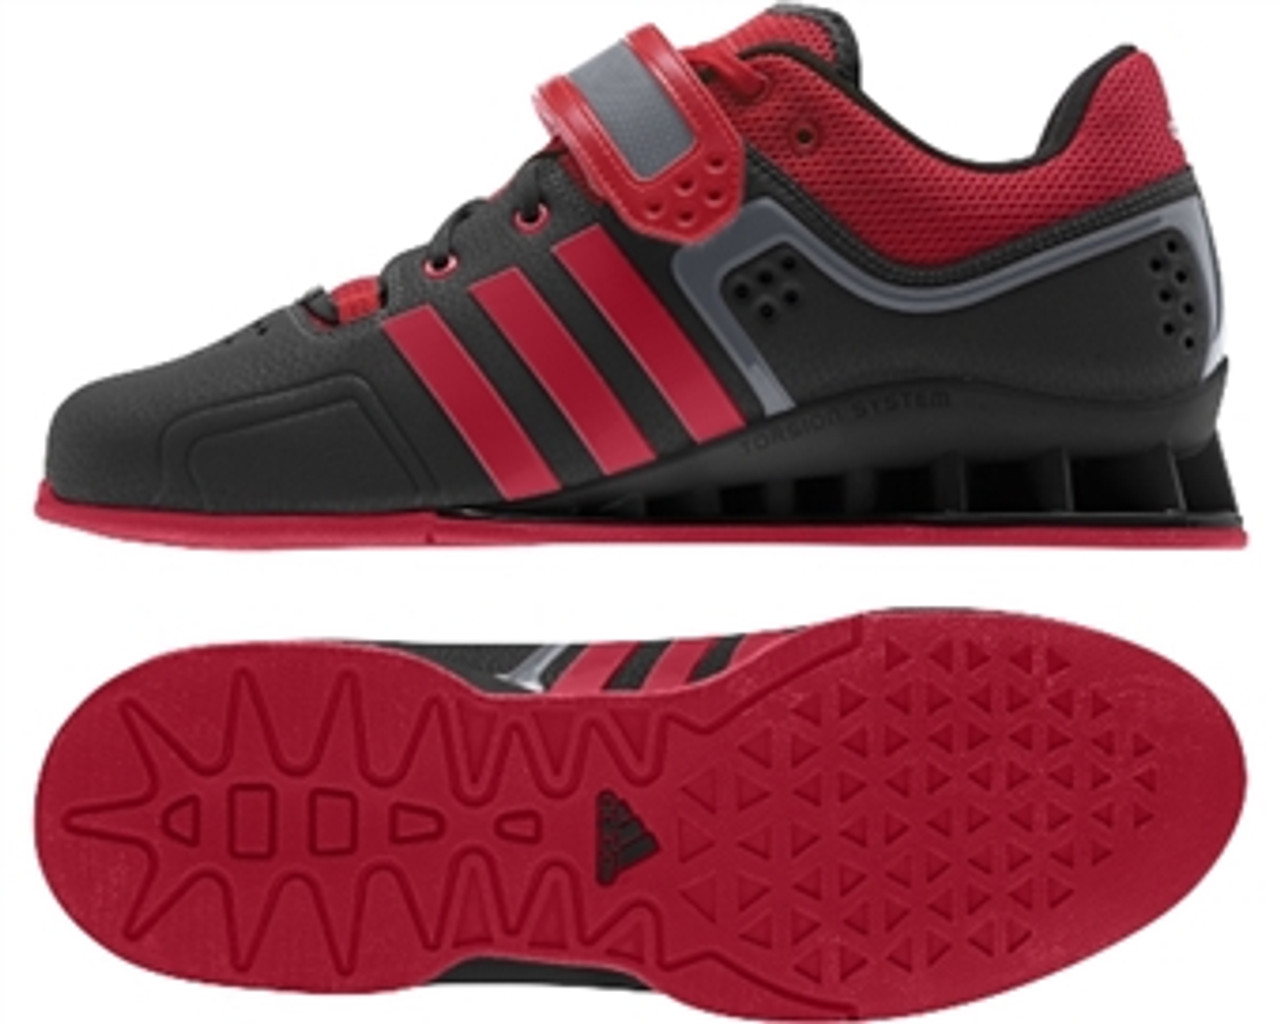 adidas adipower red and black